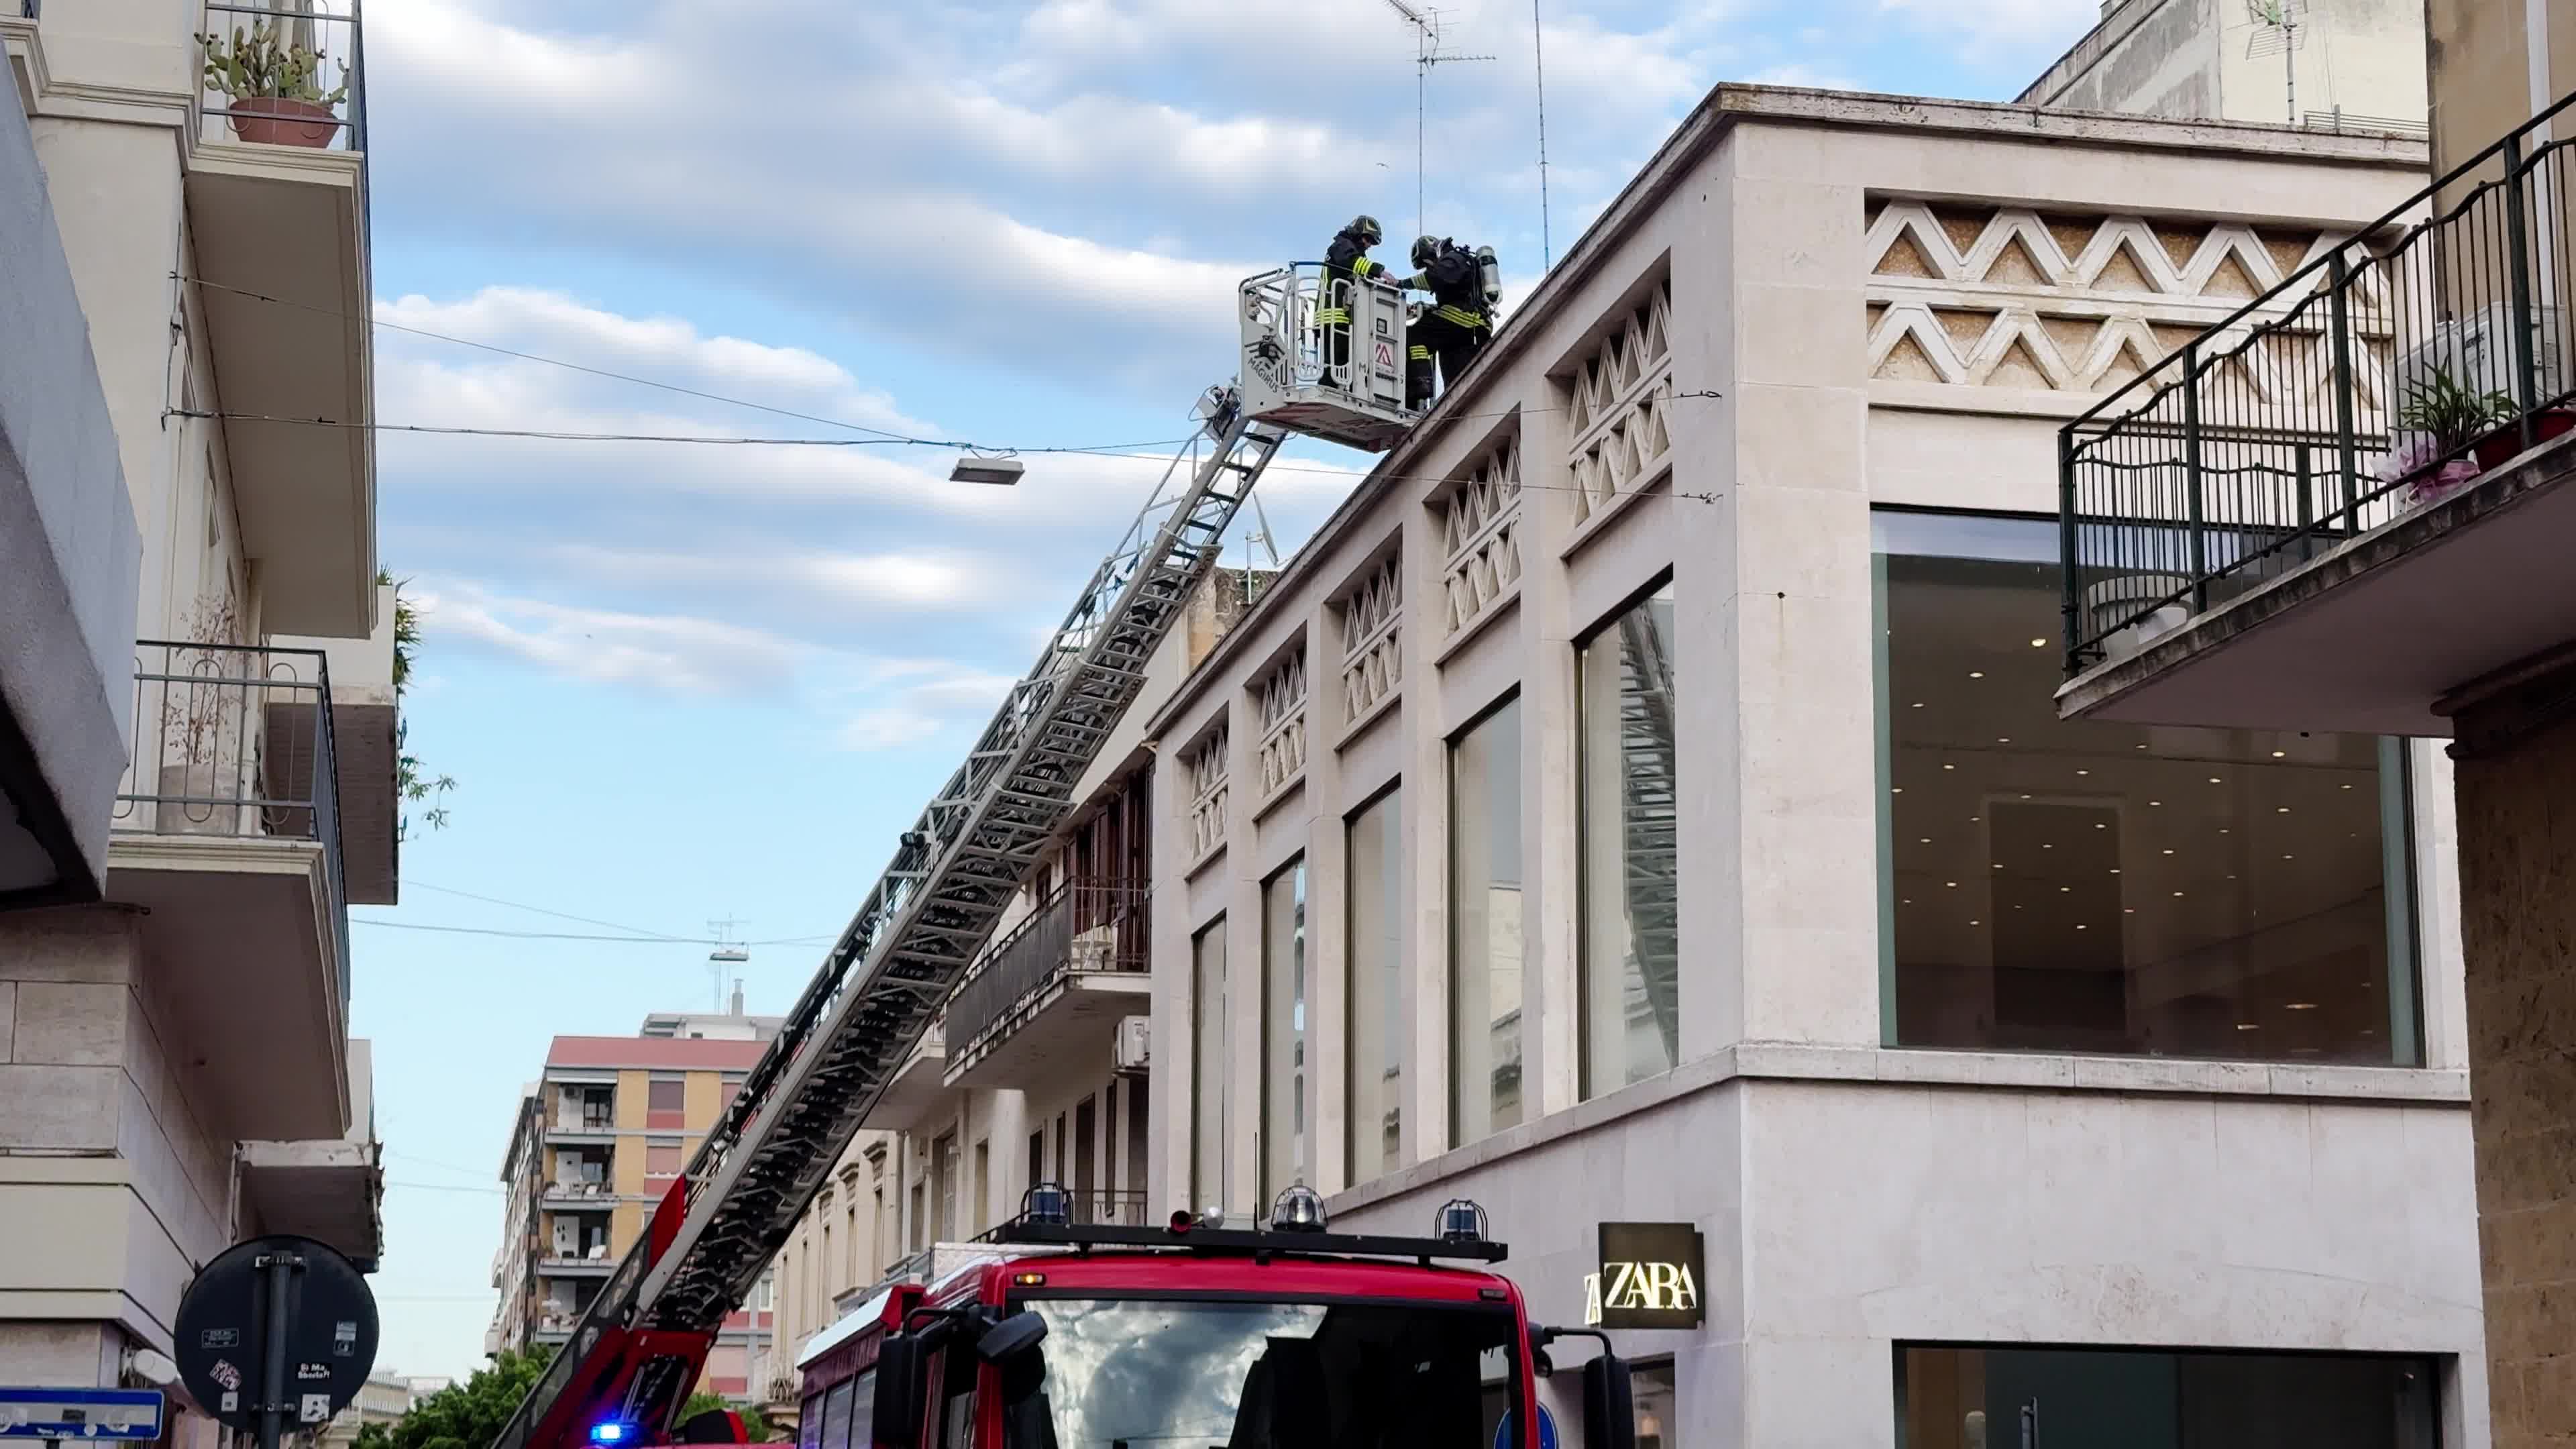 Fire outbreak at the Zara clothing store in Lecce